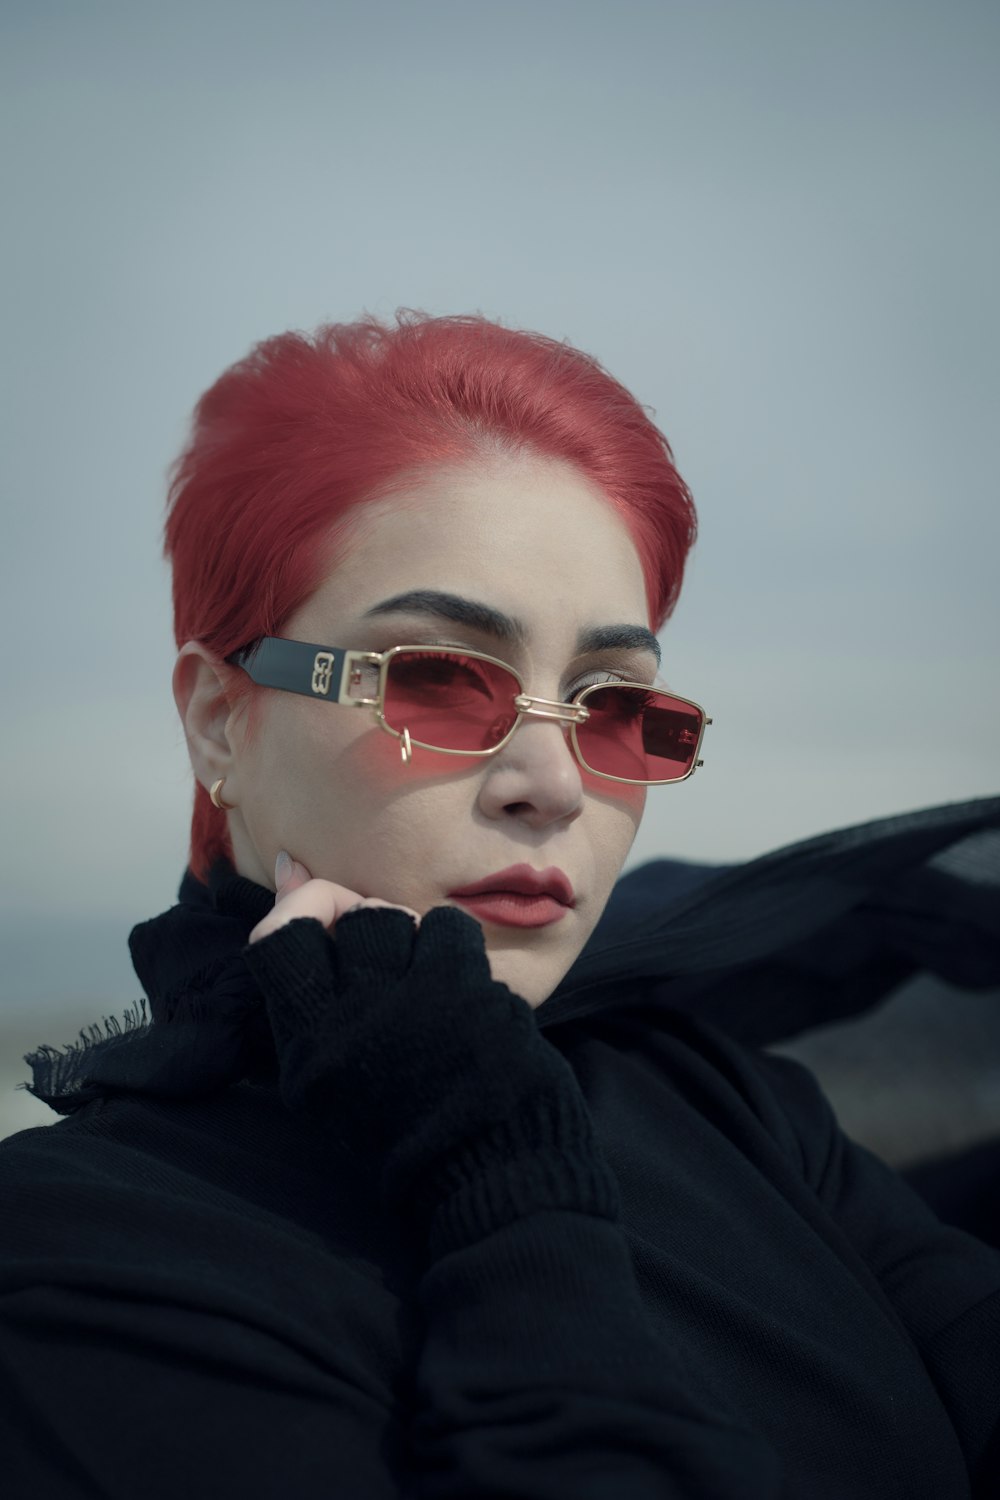 a woman with red hair wearing sunglasses and a black jacket